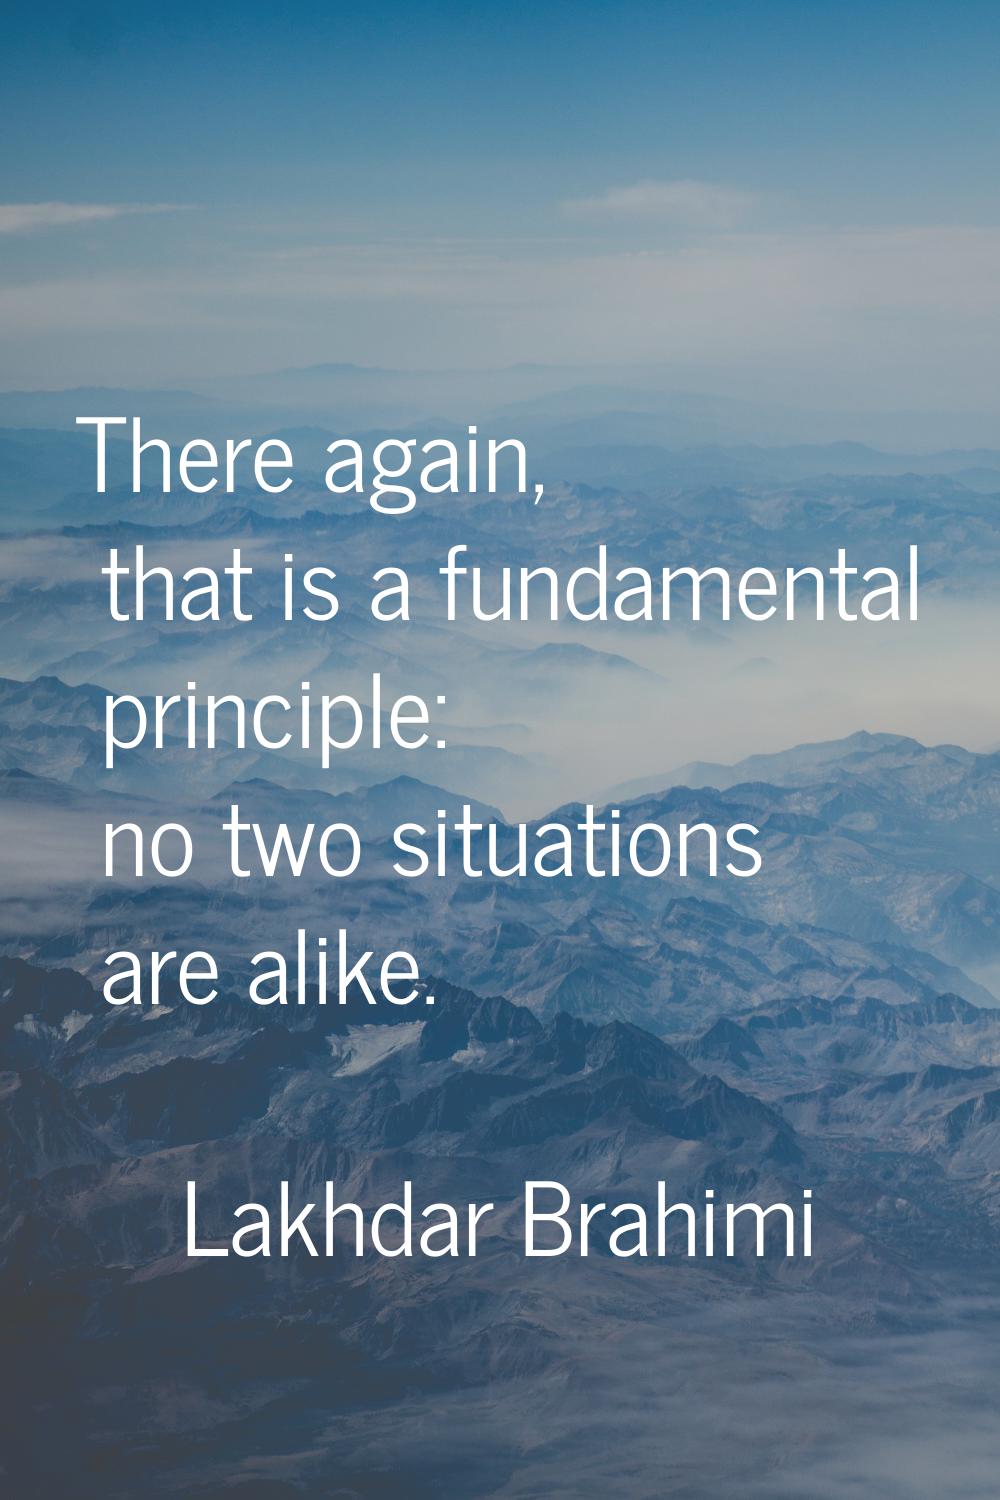 There again, that is a fundamental principle: no two situations are alike.